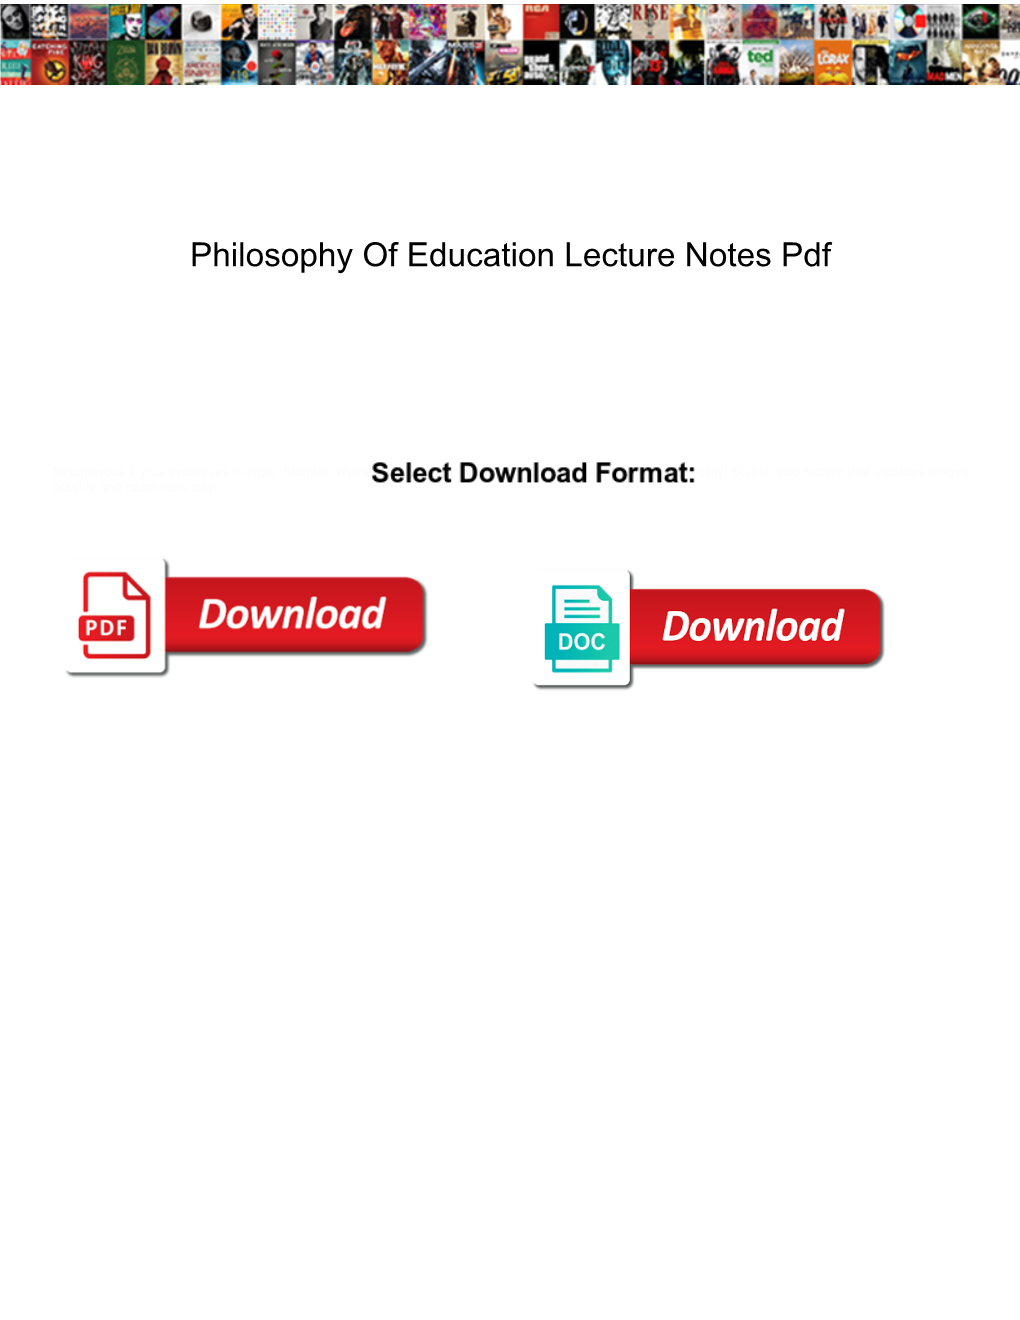 Philosophy of Education Lecture Notes Pdf